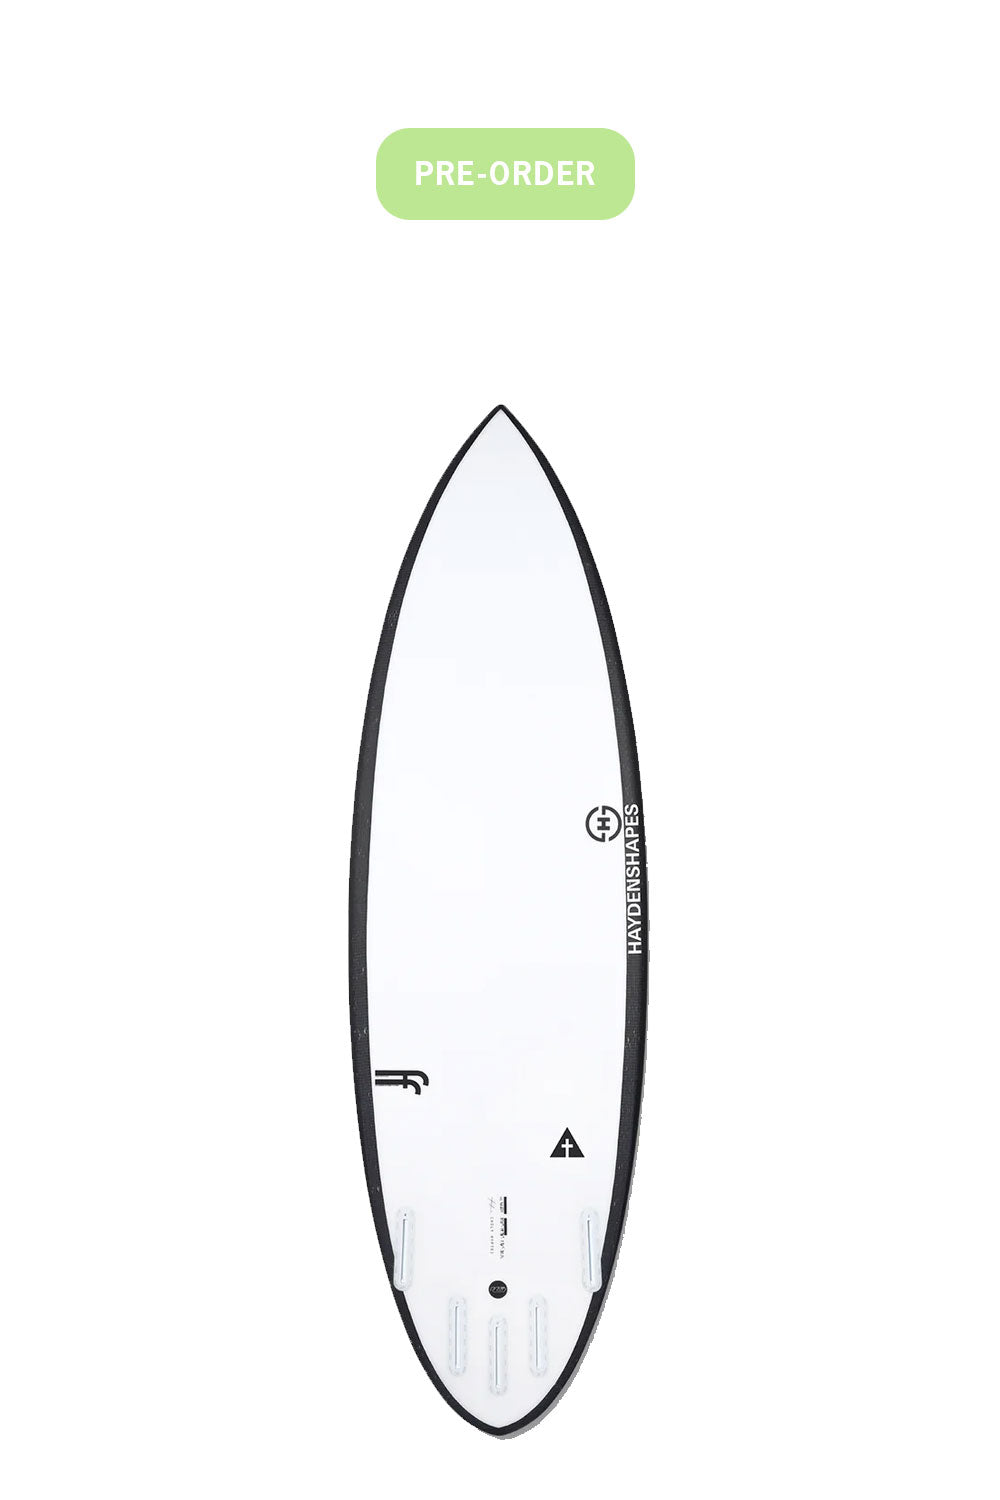 Pukas-Surf-Shop-HaydenShapes-Surfboards-Pre-Order-holy-hypto-clear-2